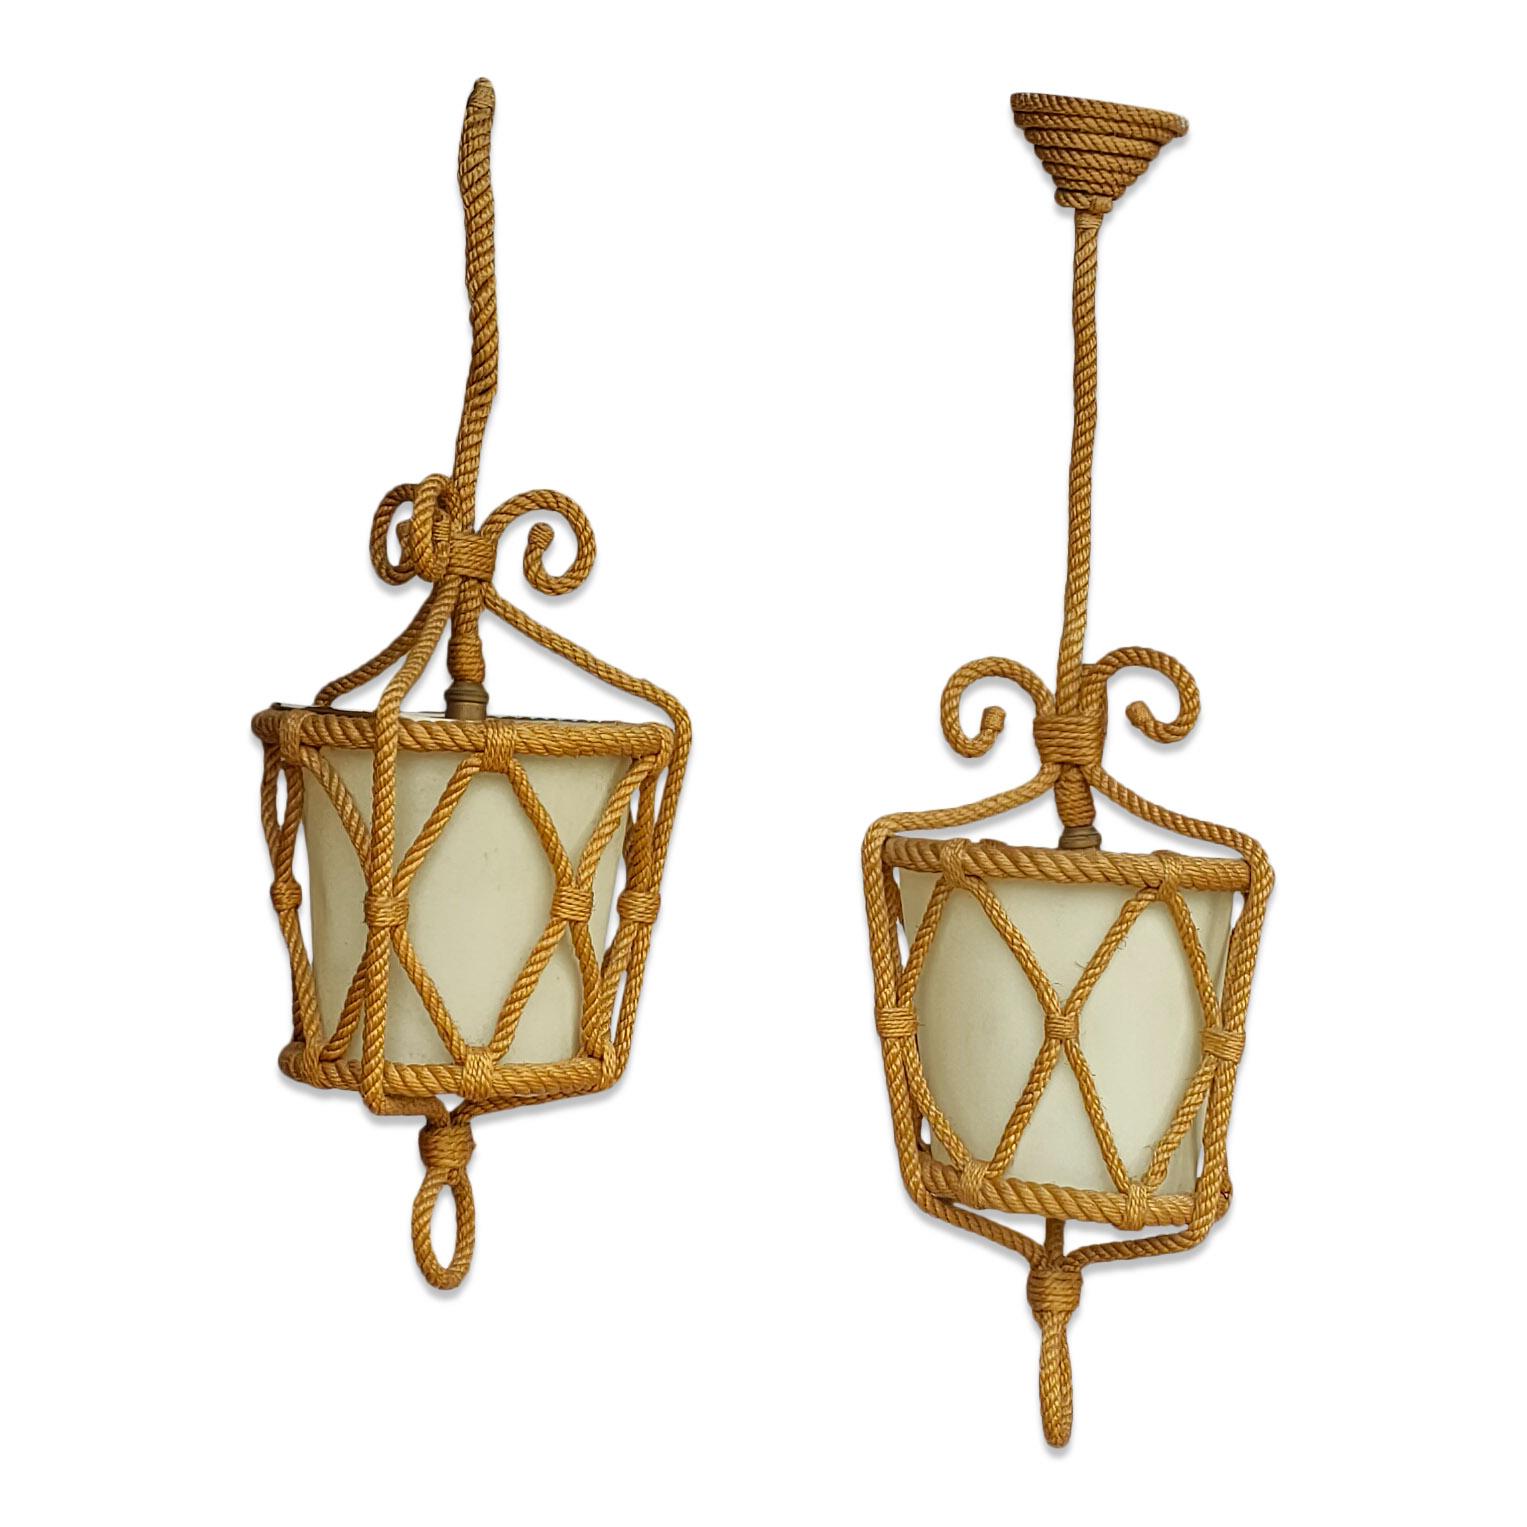 Exceptional pair of rope pendants
Adrien Audoux and Frida Minnet
French Riviera, Golfe Juan
Original European socket and wiring
one of the pendants' cord is shorter by 8cm (3